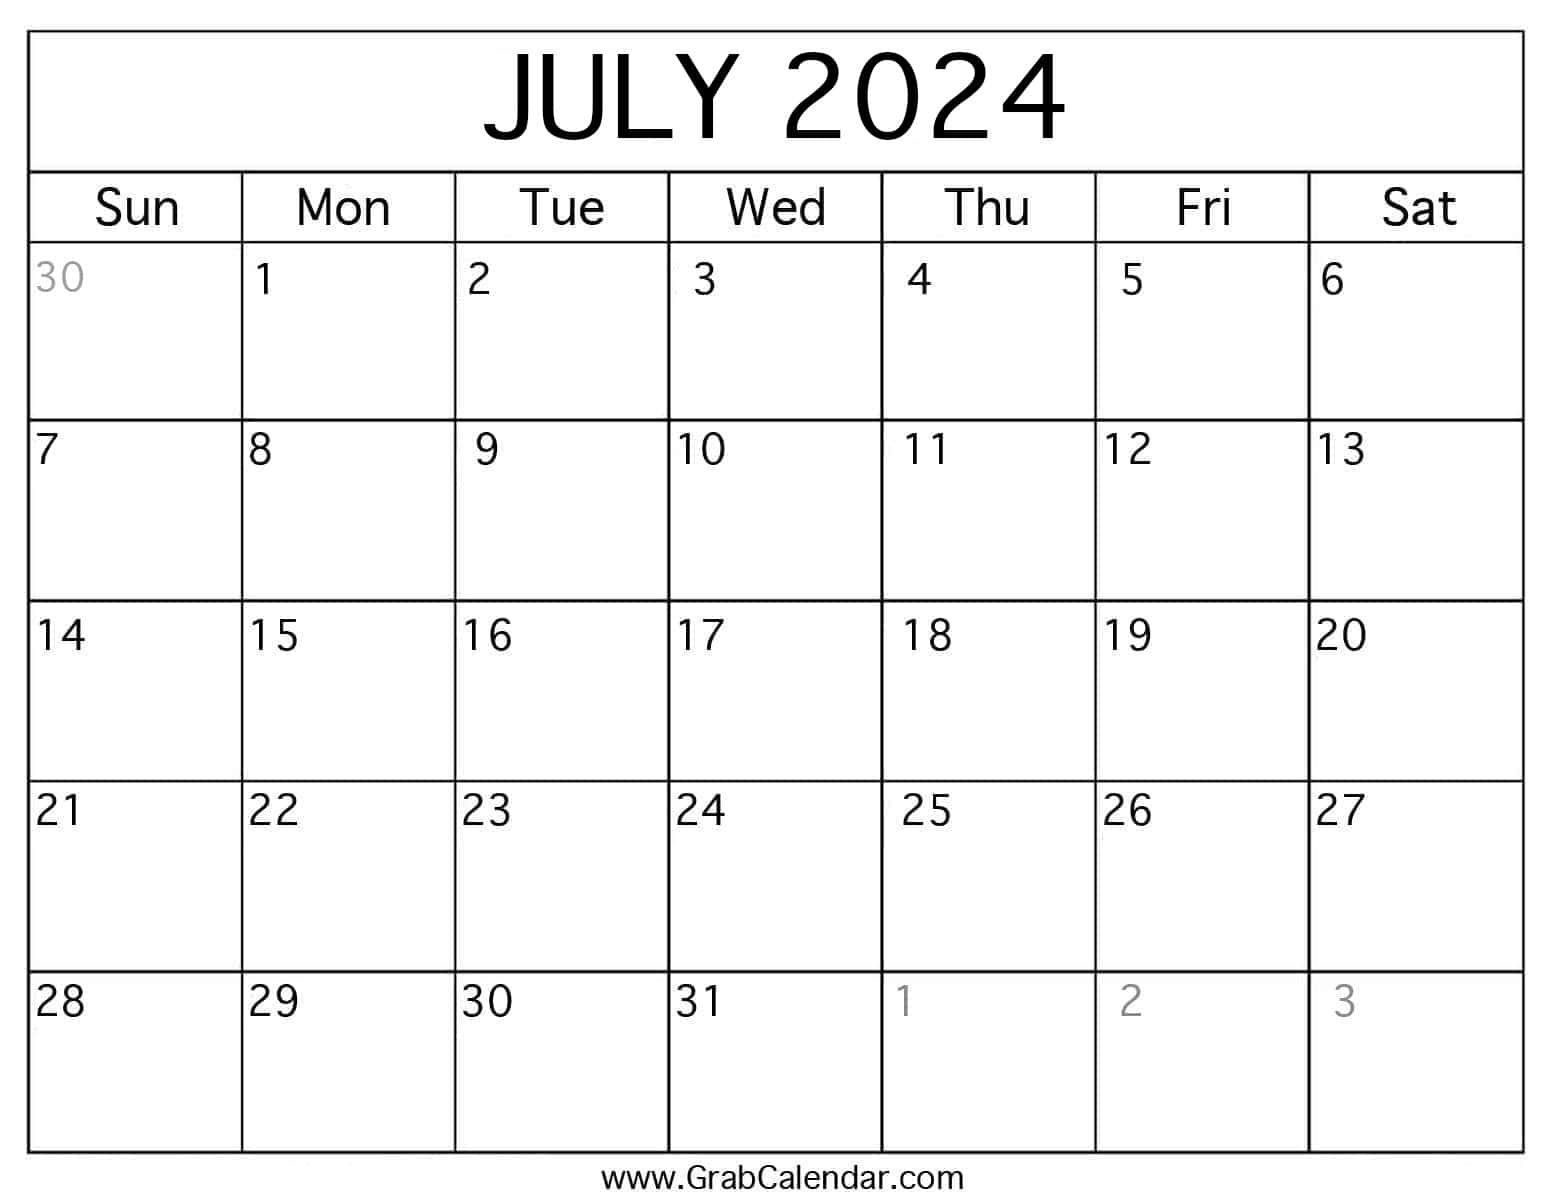 Printable July 2024 Calendar intended for Show Me a Picture of July Calendar 2024